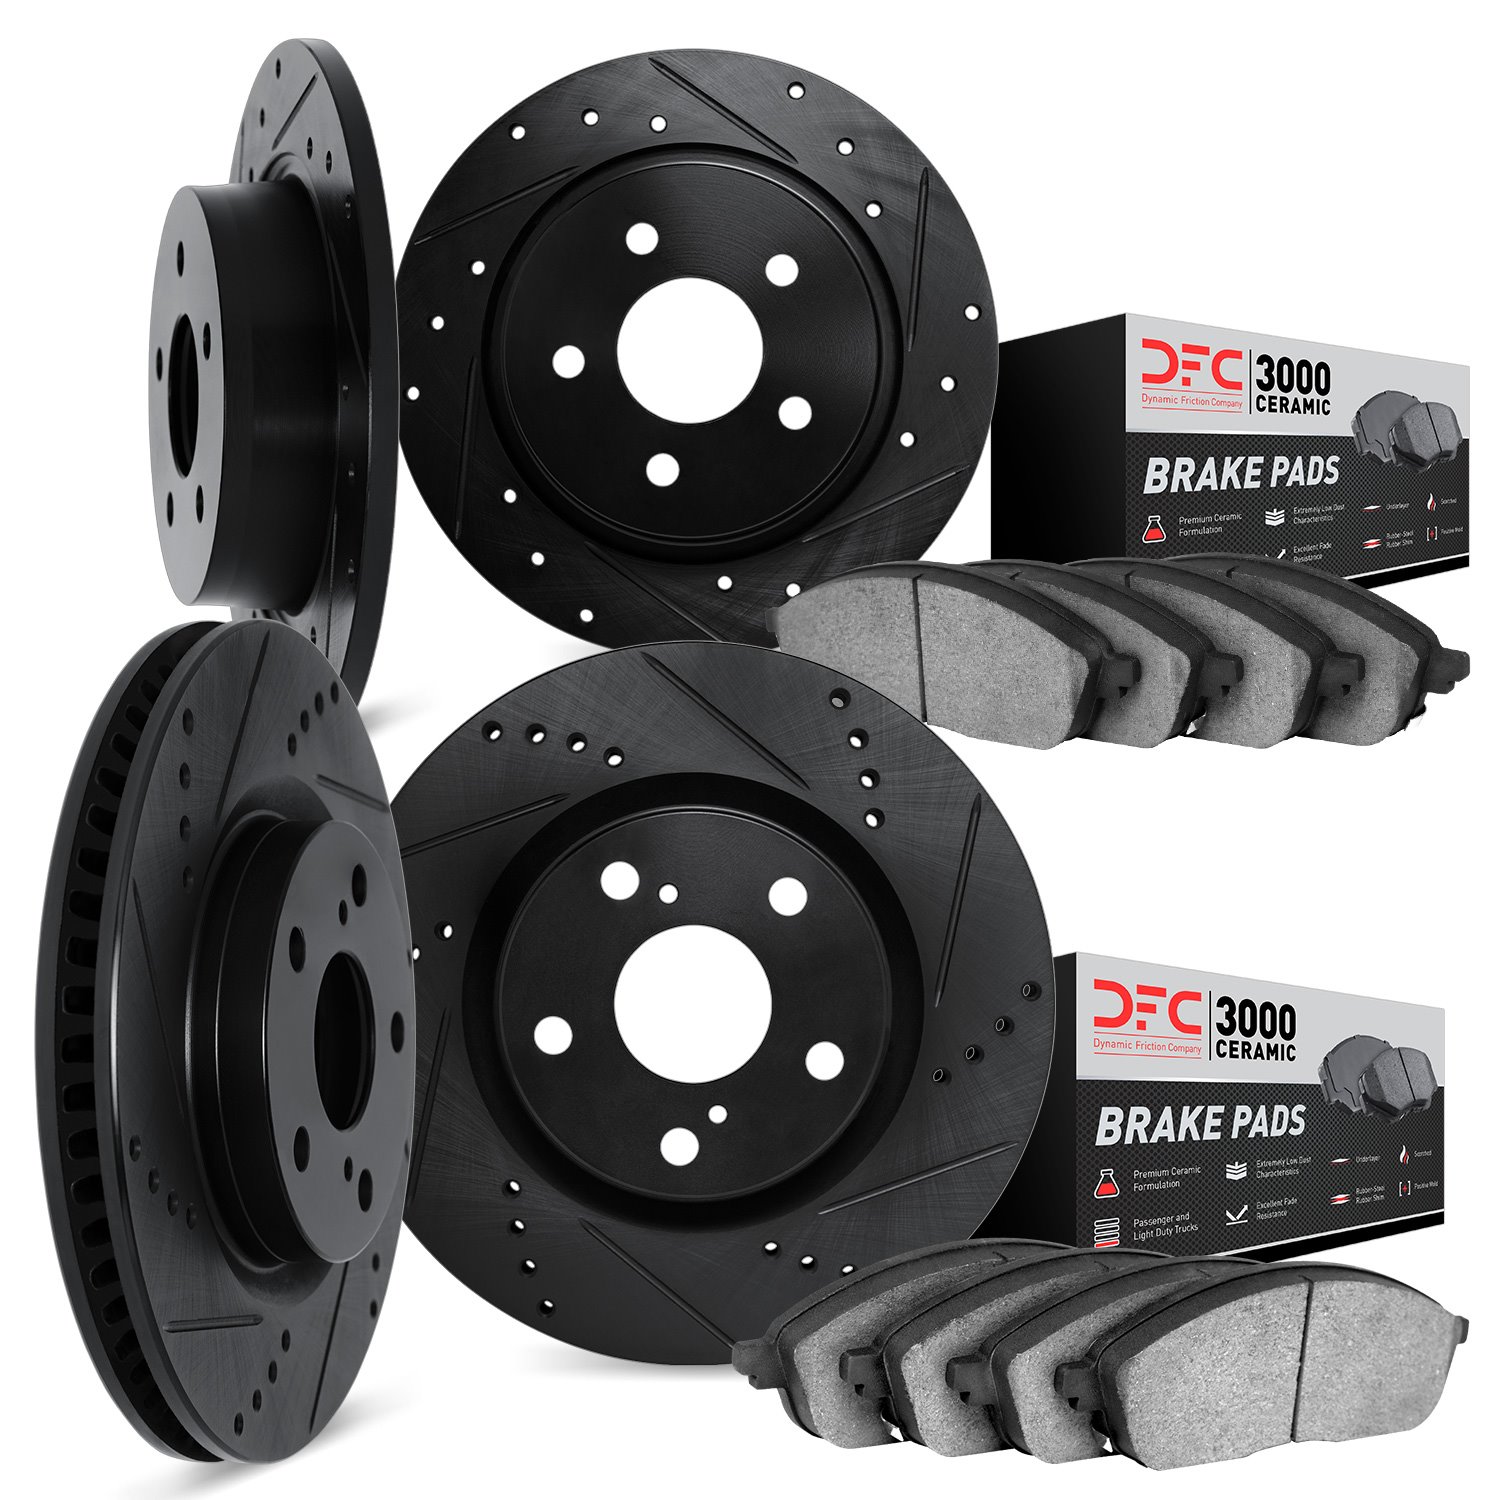 8304-01001 Drilled/Slotted Brake Rotors with 3000-Series Ceramic Brake Pads Kit [Black], 2014-2019 Suzuki, Position: Front and R